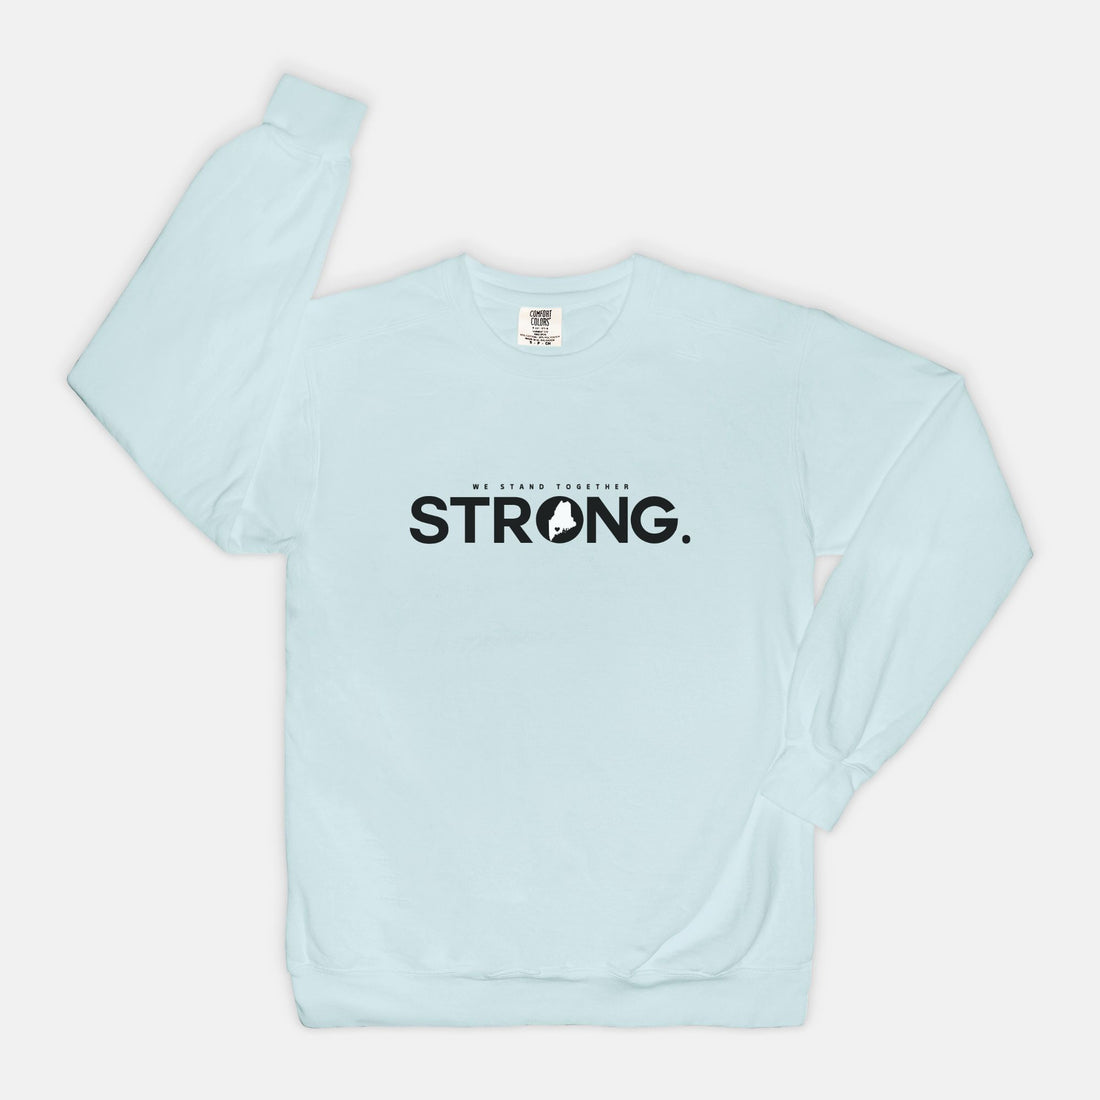 We Stand Together STRONG.  Maine Support Lewiston Crewneck Sweatshirt - ALL proceeds will go to victim funds